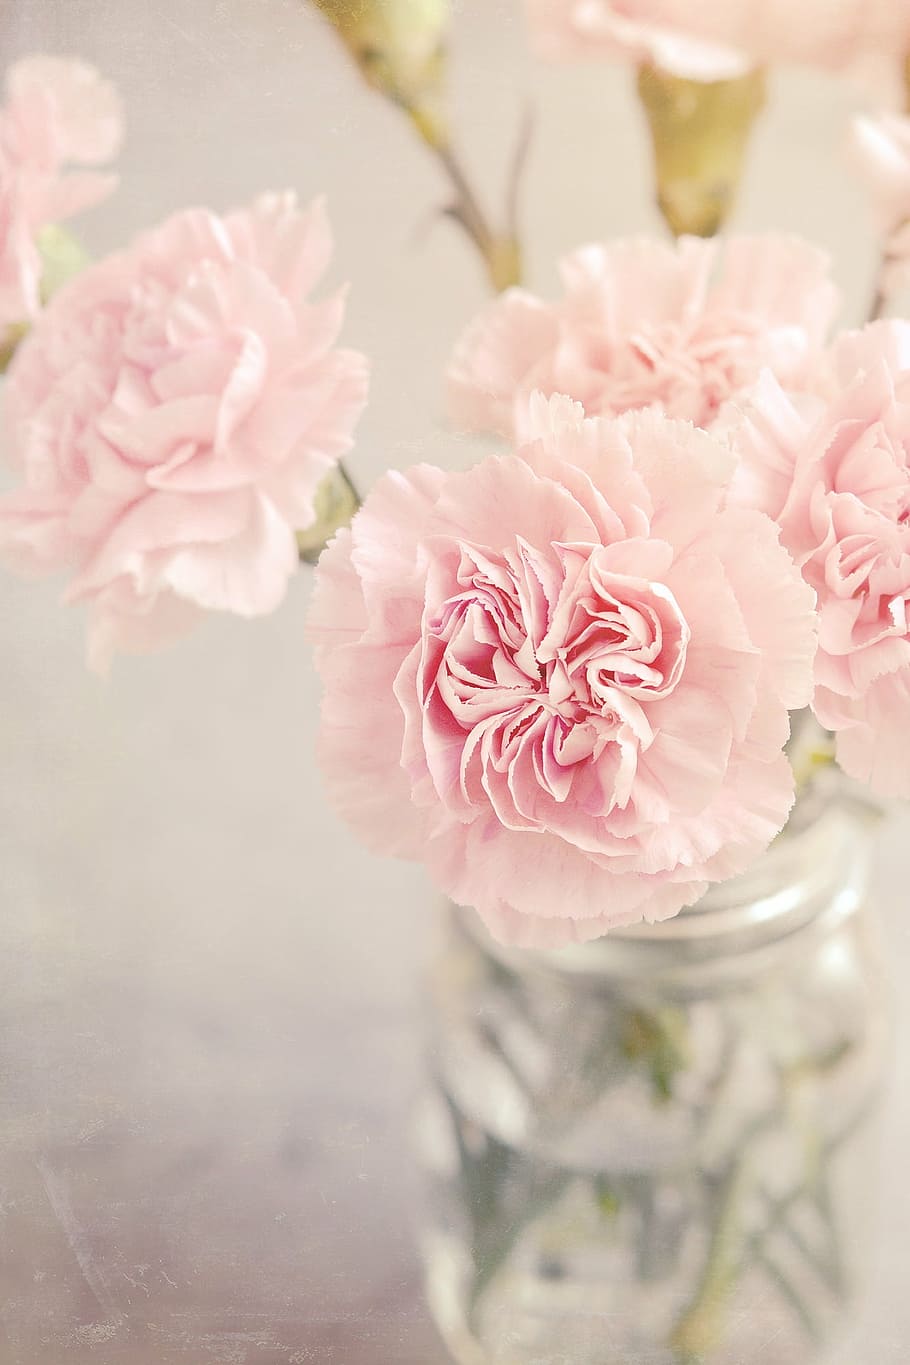 Page 3 Carnation Bouquet 1080p 2k 4k 5k Hd Wallpapers Free Download Wallpaper Flare